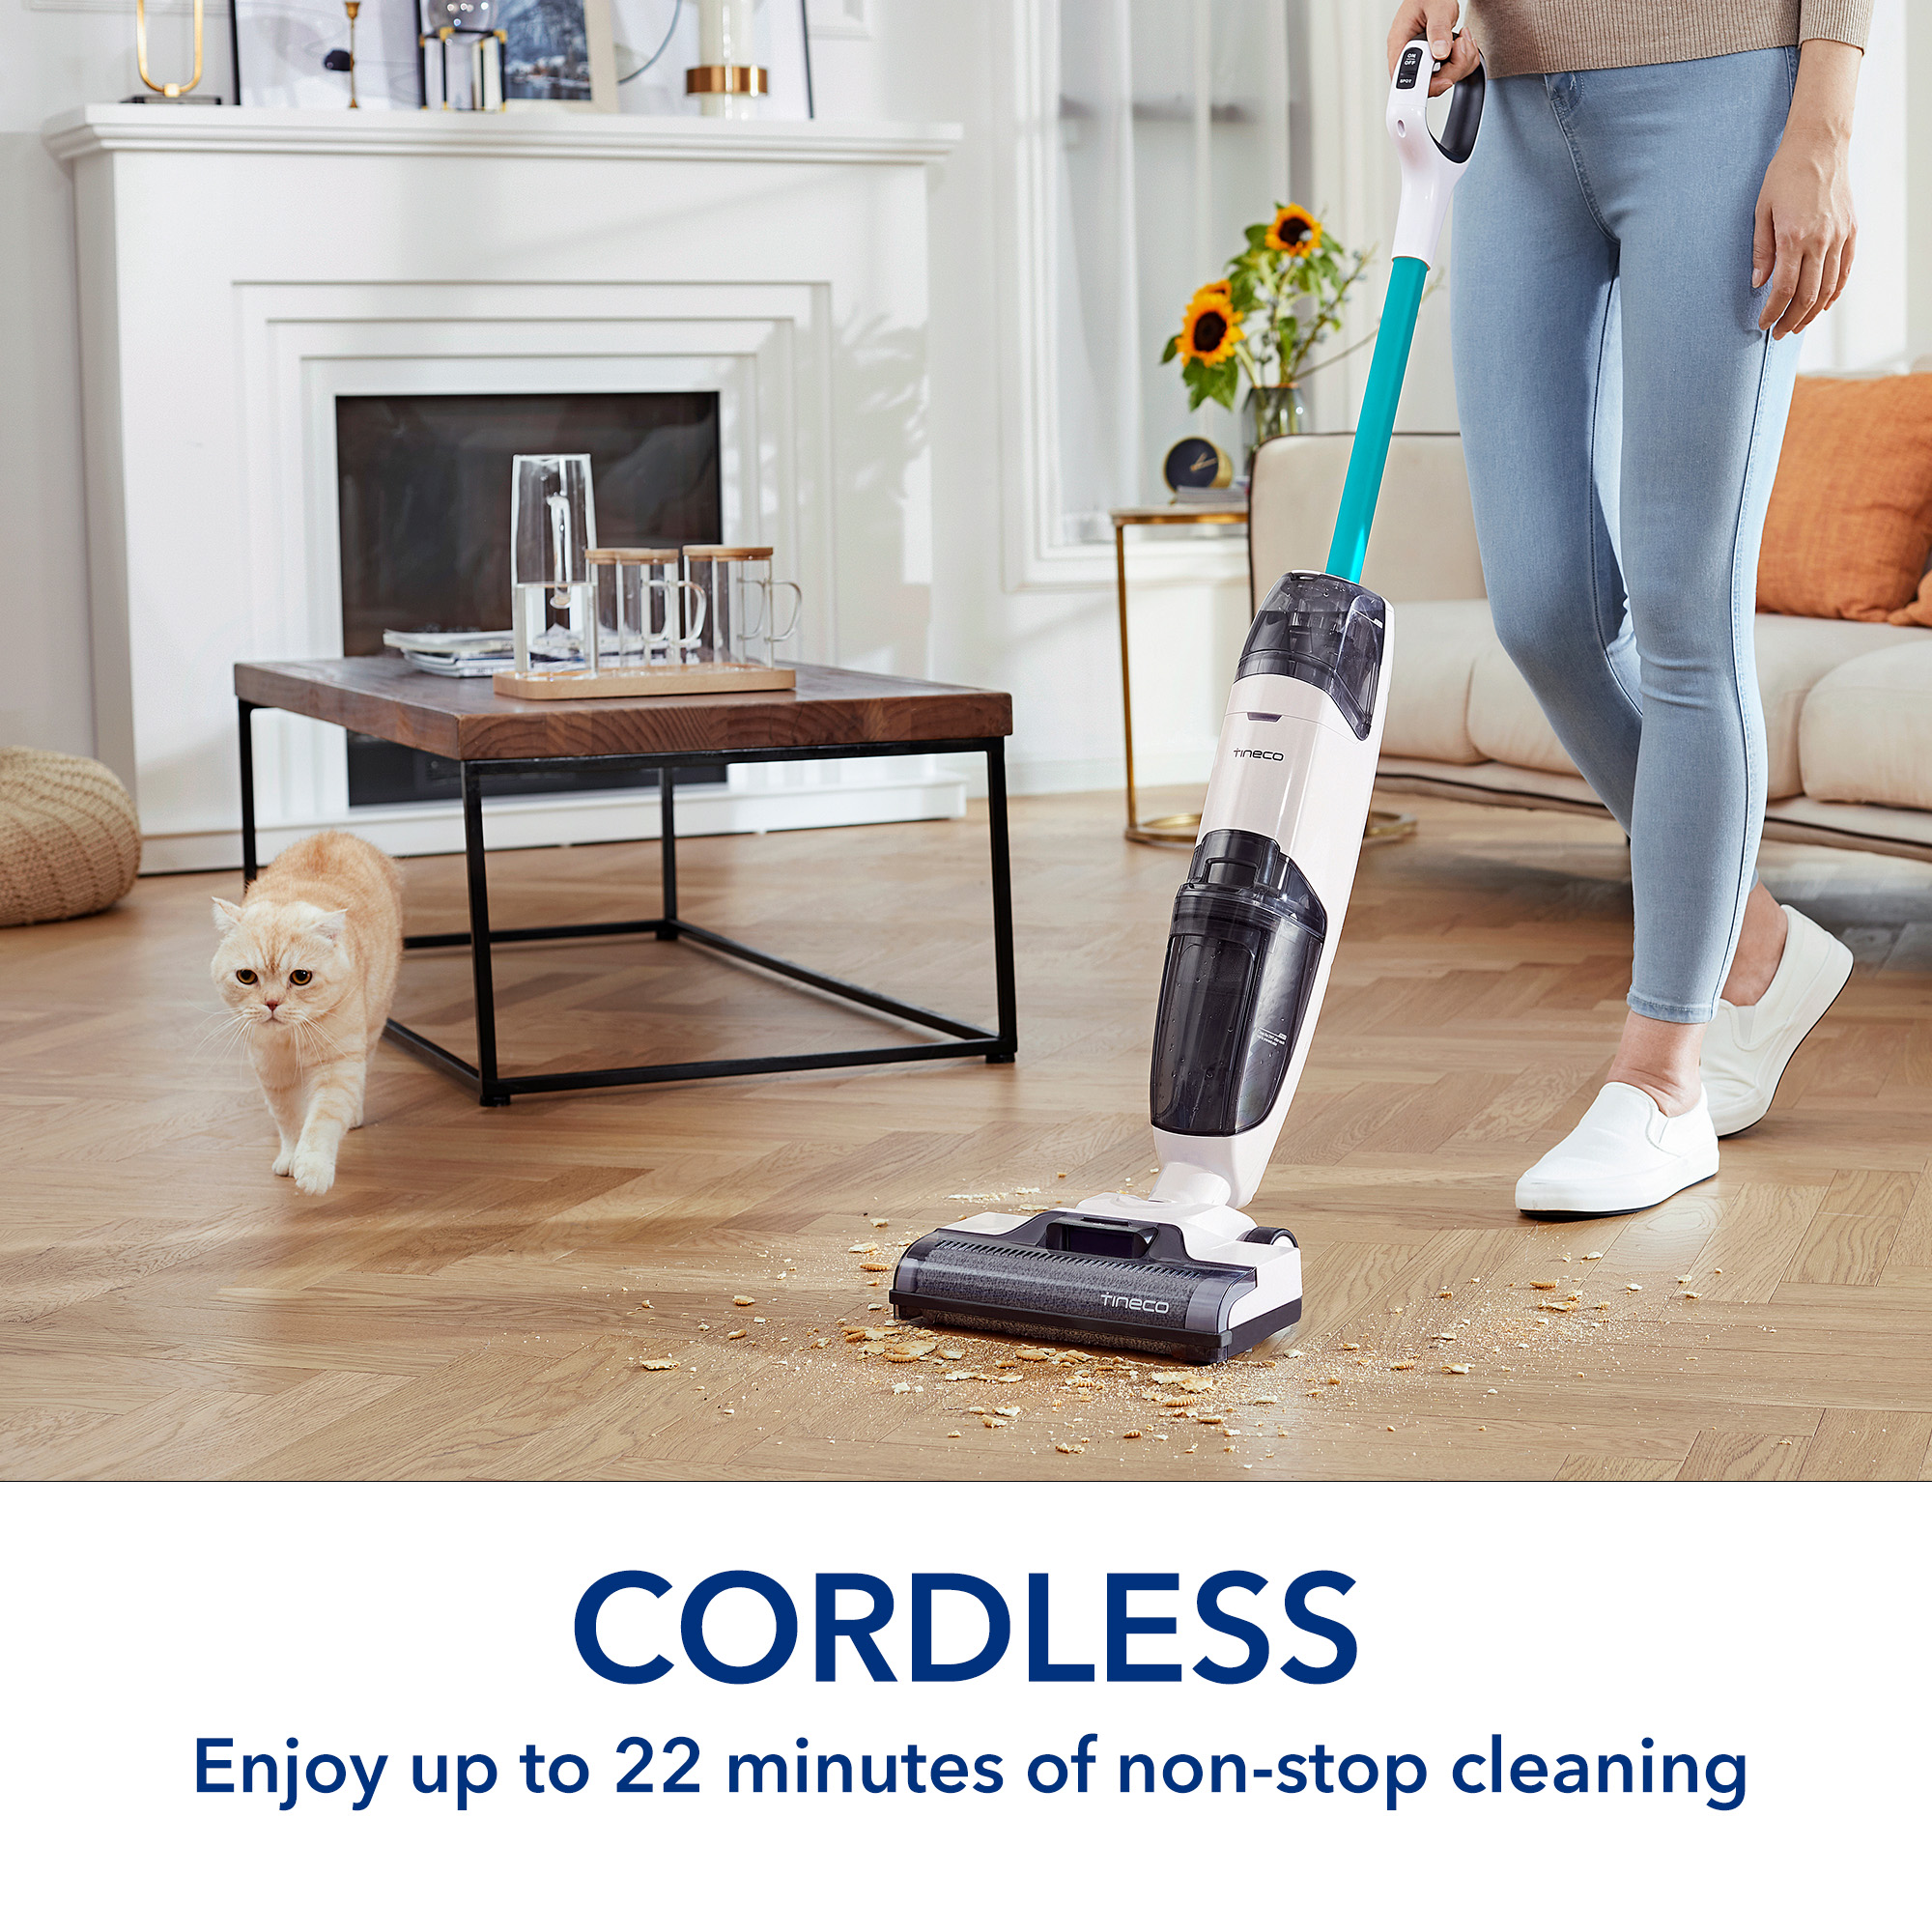 Tineco iFloor 2 Max Cordless Wet/Dry Vacuum Cleaner and Hard Floor Washer - Limited Edition (Blue) - image 4 of 6